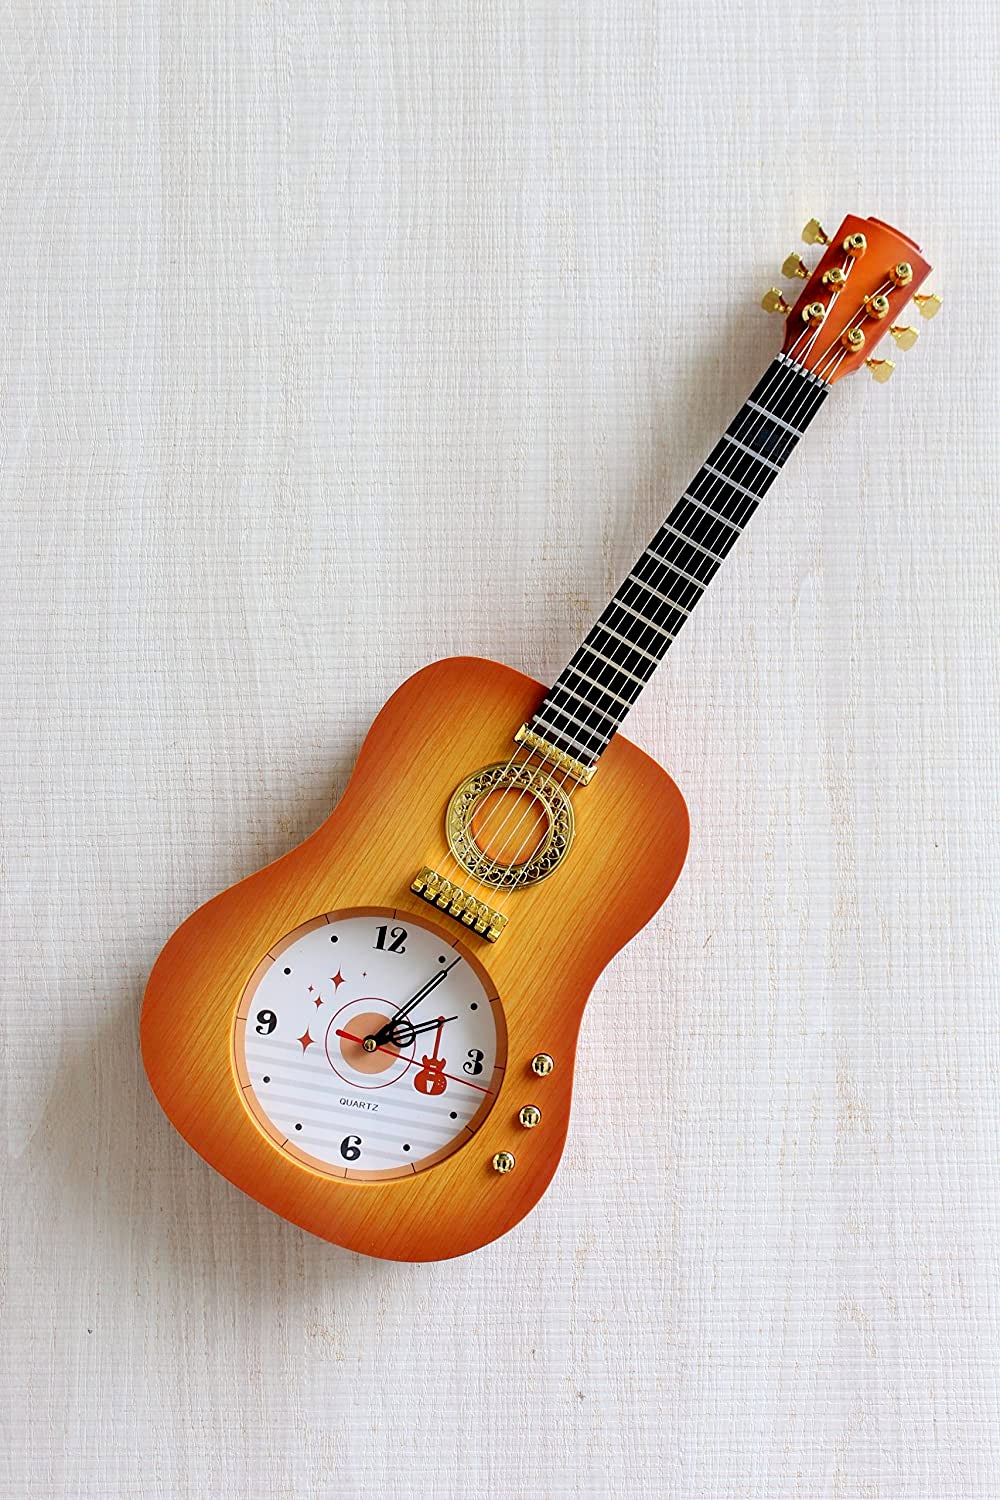 FunkyTradition Decorative Guitar Plastic Wall Clock for Home and Kids Room Decor (23 cm x 5.5 cm x 62 cm)